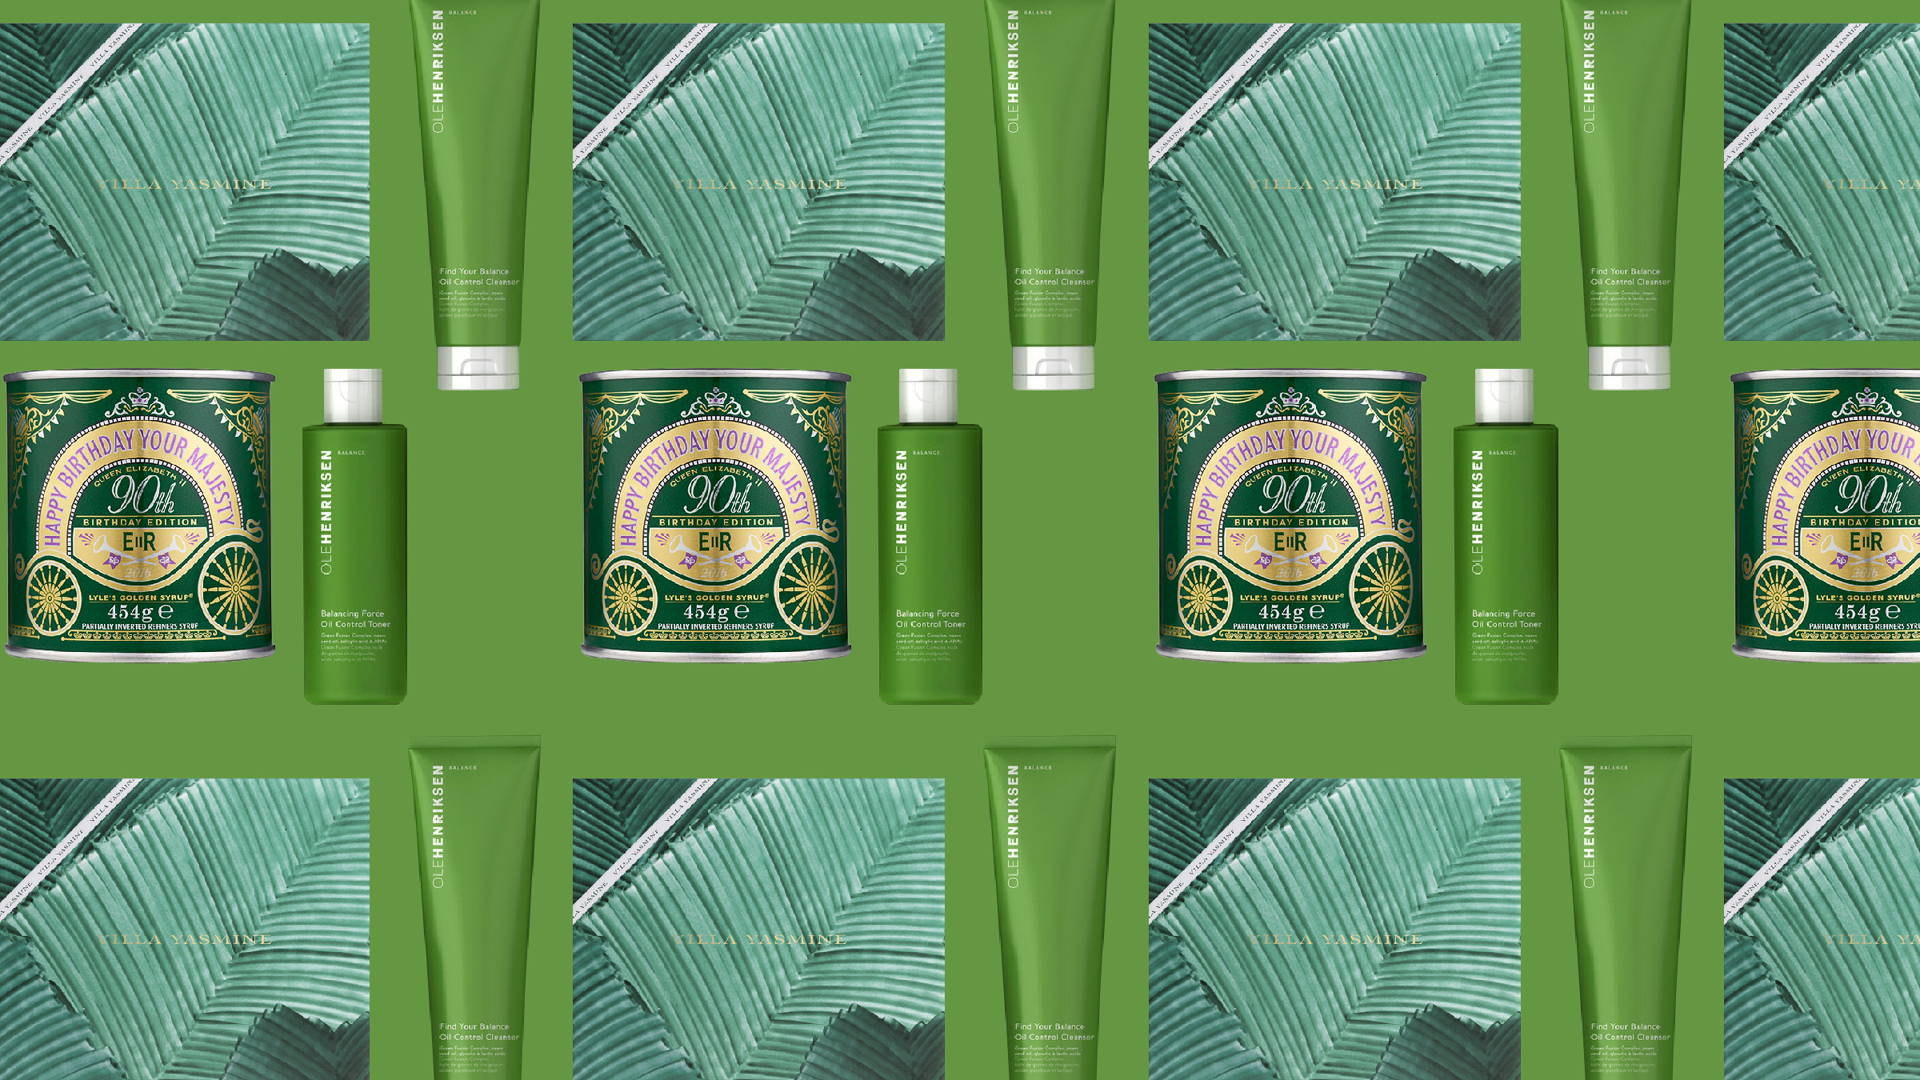 32 Packaging Designs That Feature The Color Green | Dieline - Design,  Branding & Packaging Inspiration